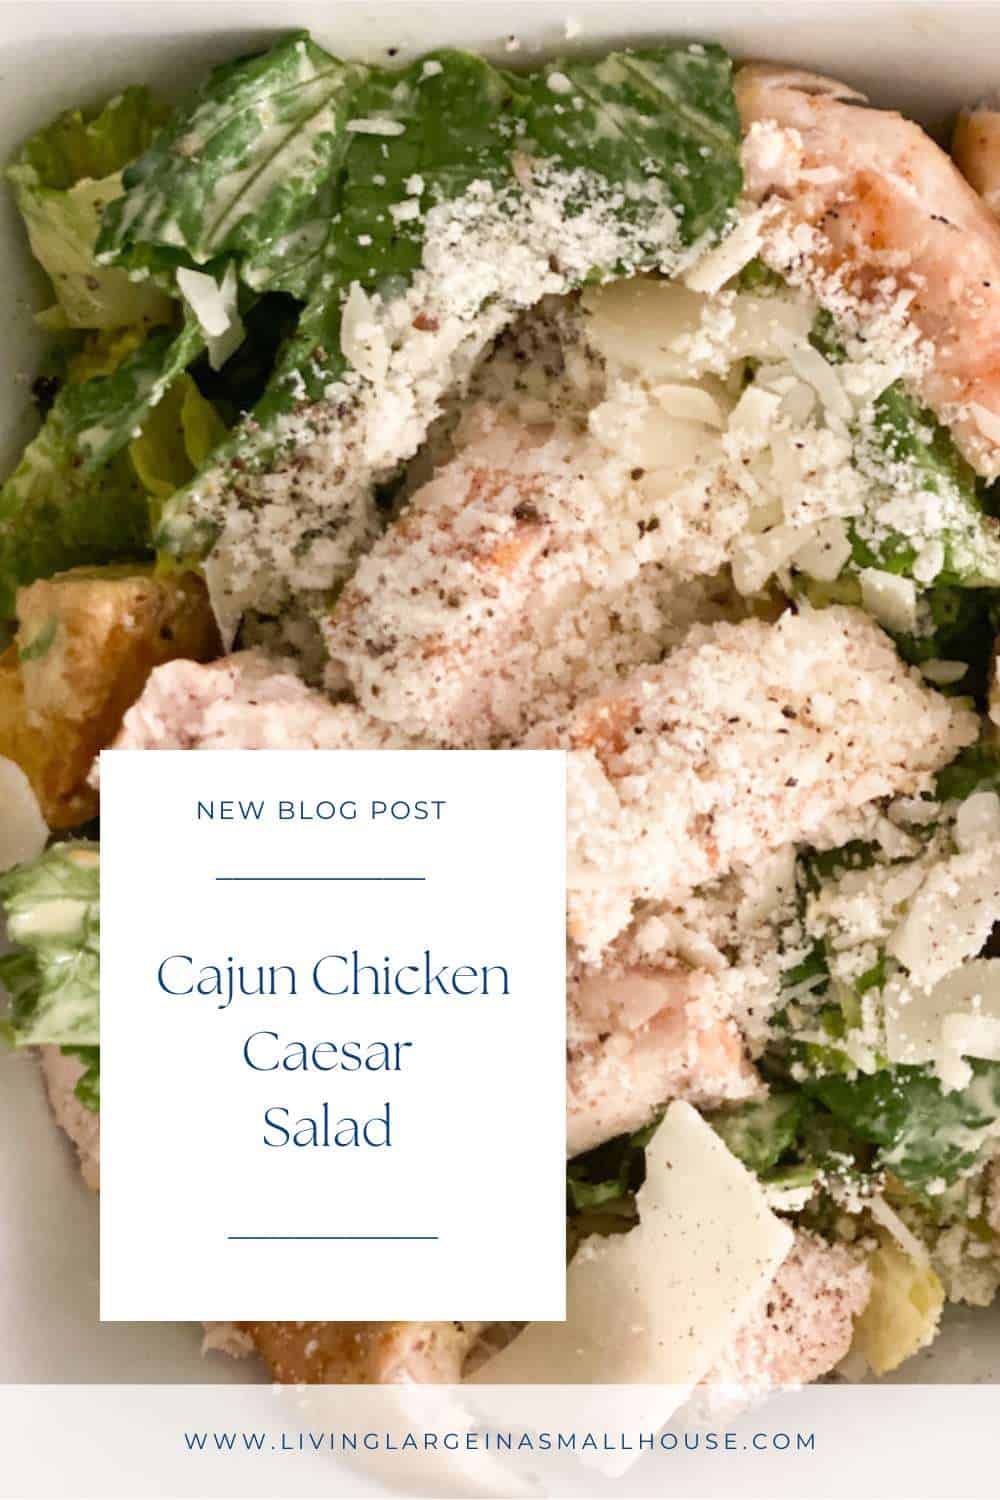 pinterest graphic with a picture of the finished caesar salad with an overlay that says "Cajun Chicken Caesar Salad"